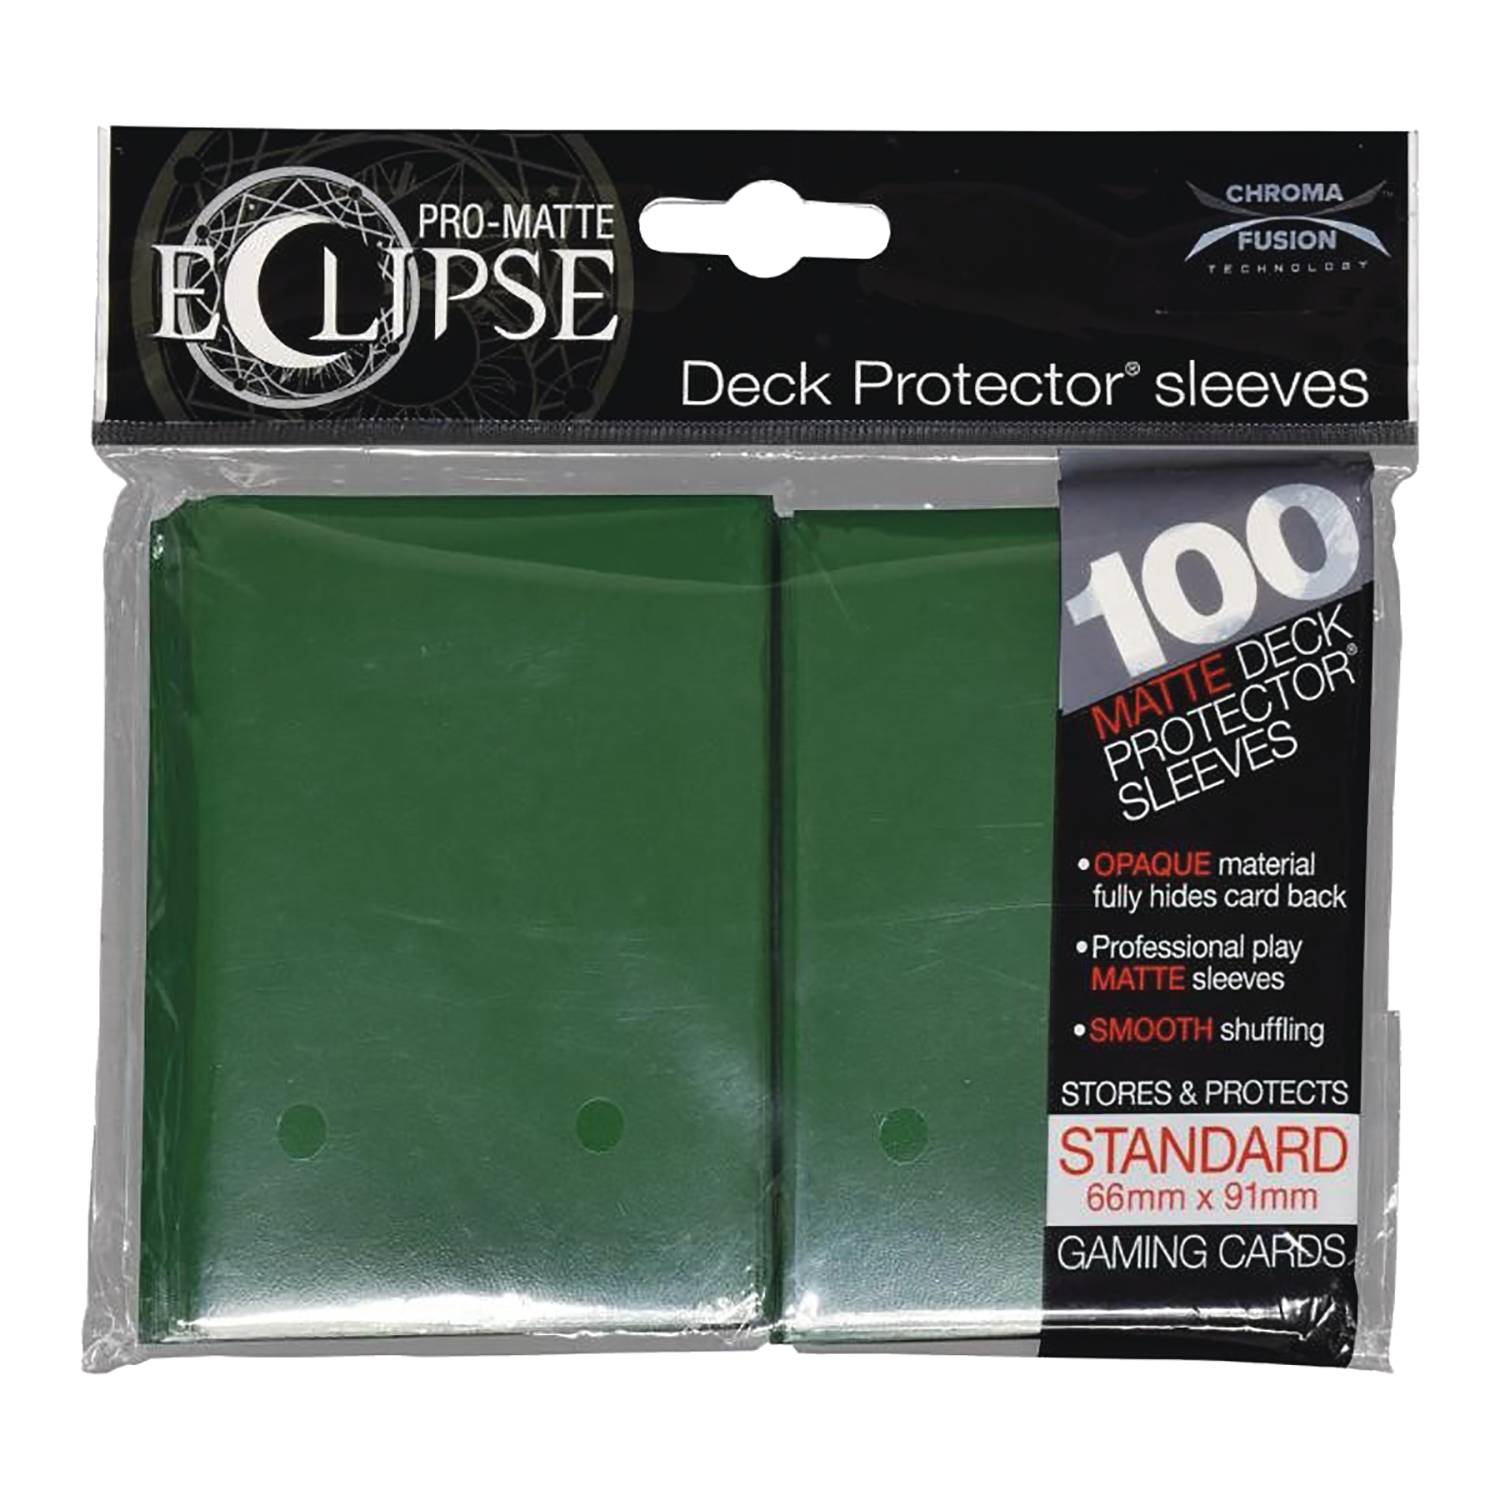 Pro Matte Eclipse 2.0 Deck Protectors Sleeves 100ct Forest Green